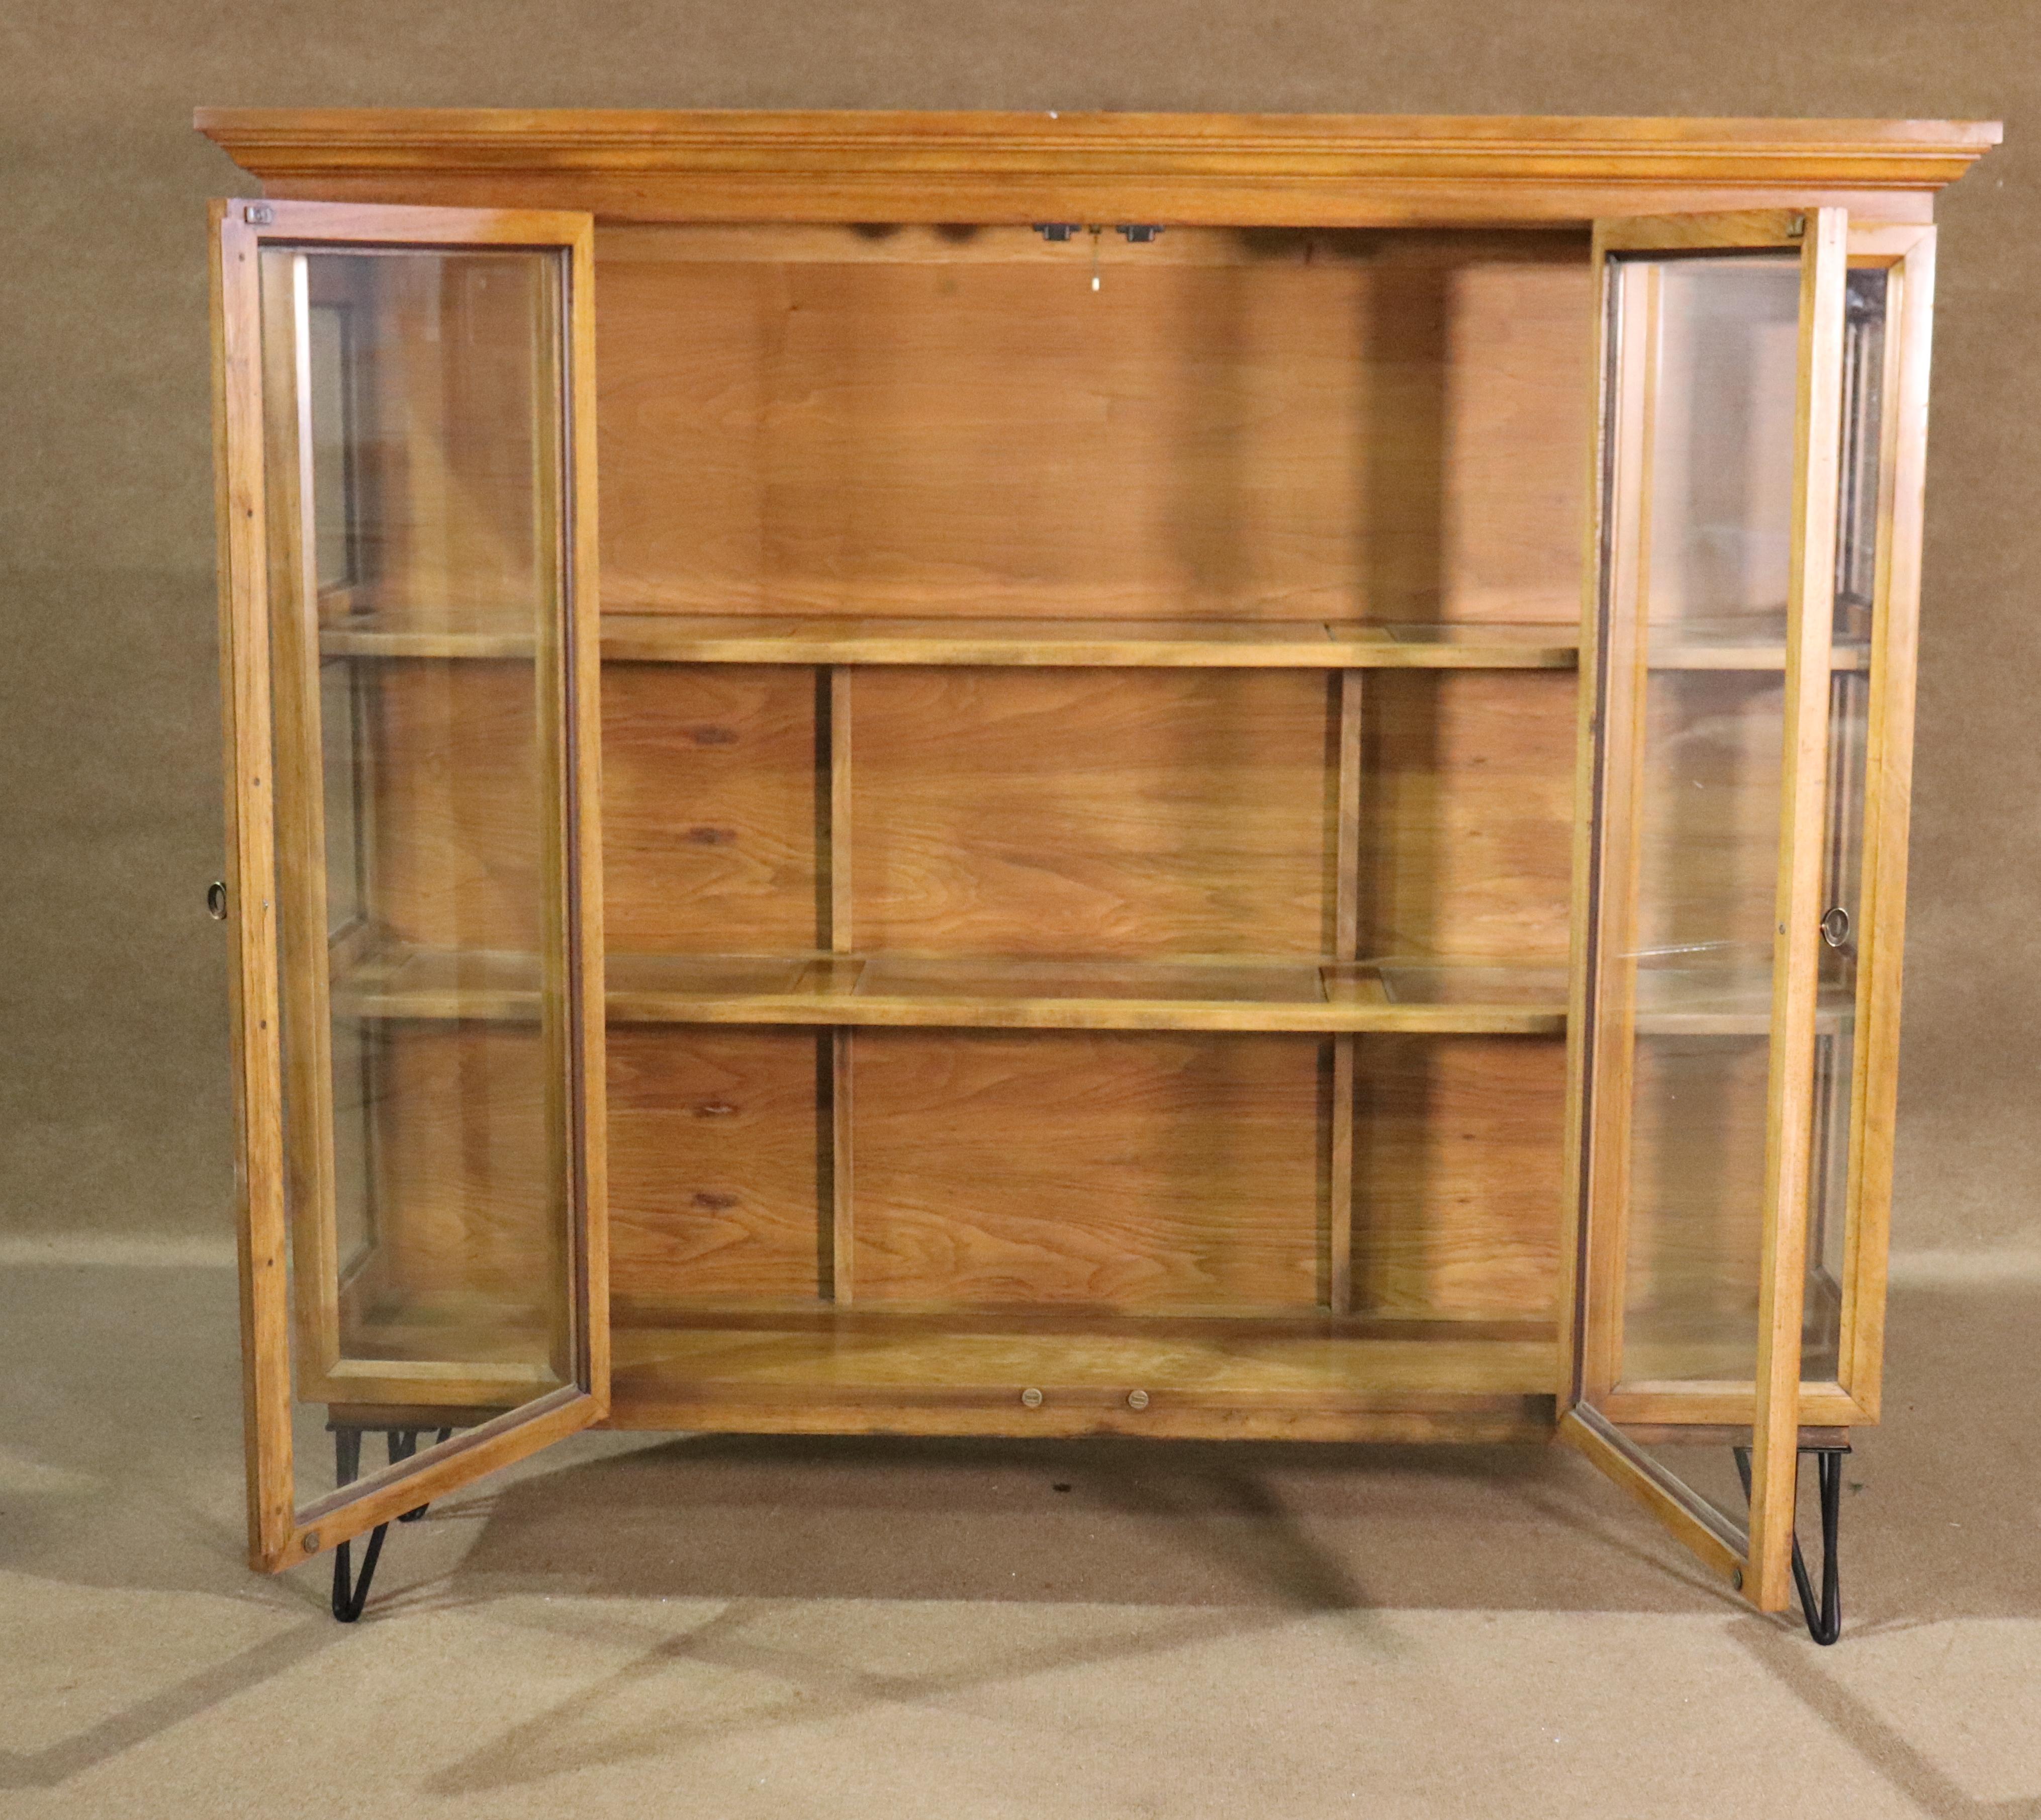 Vintage American made cabinet with hair pin iron legs. Three sides of glass for display, shelves with glass, two large doors. 
Please confirm location NY or NJ